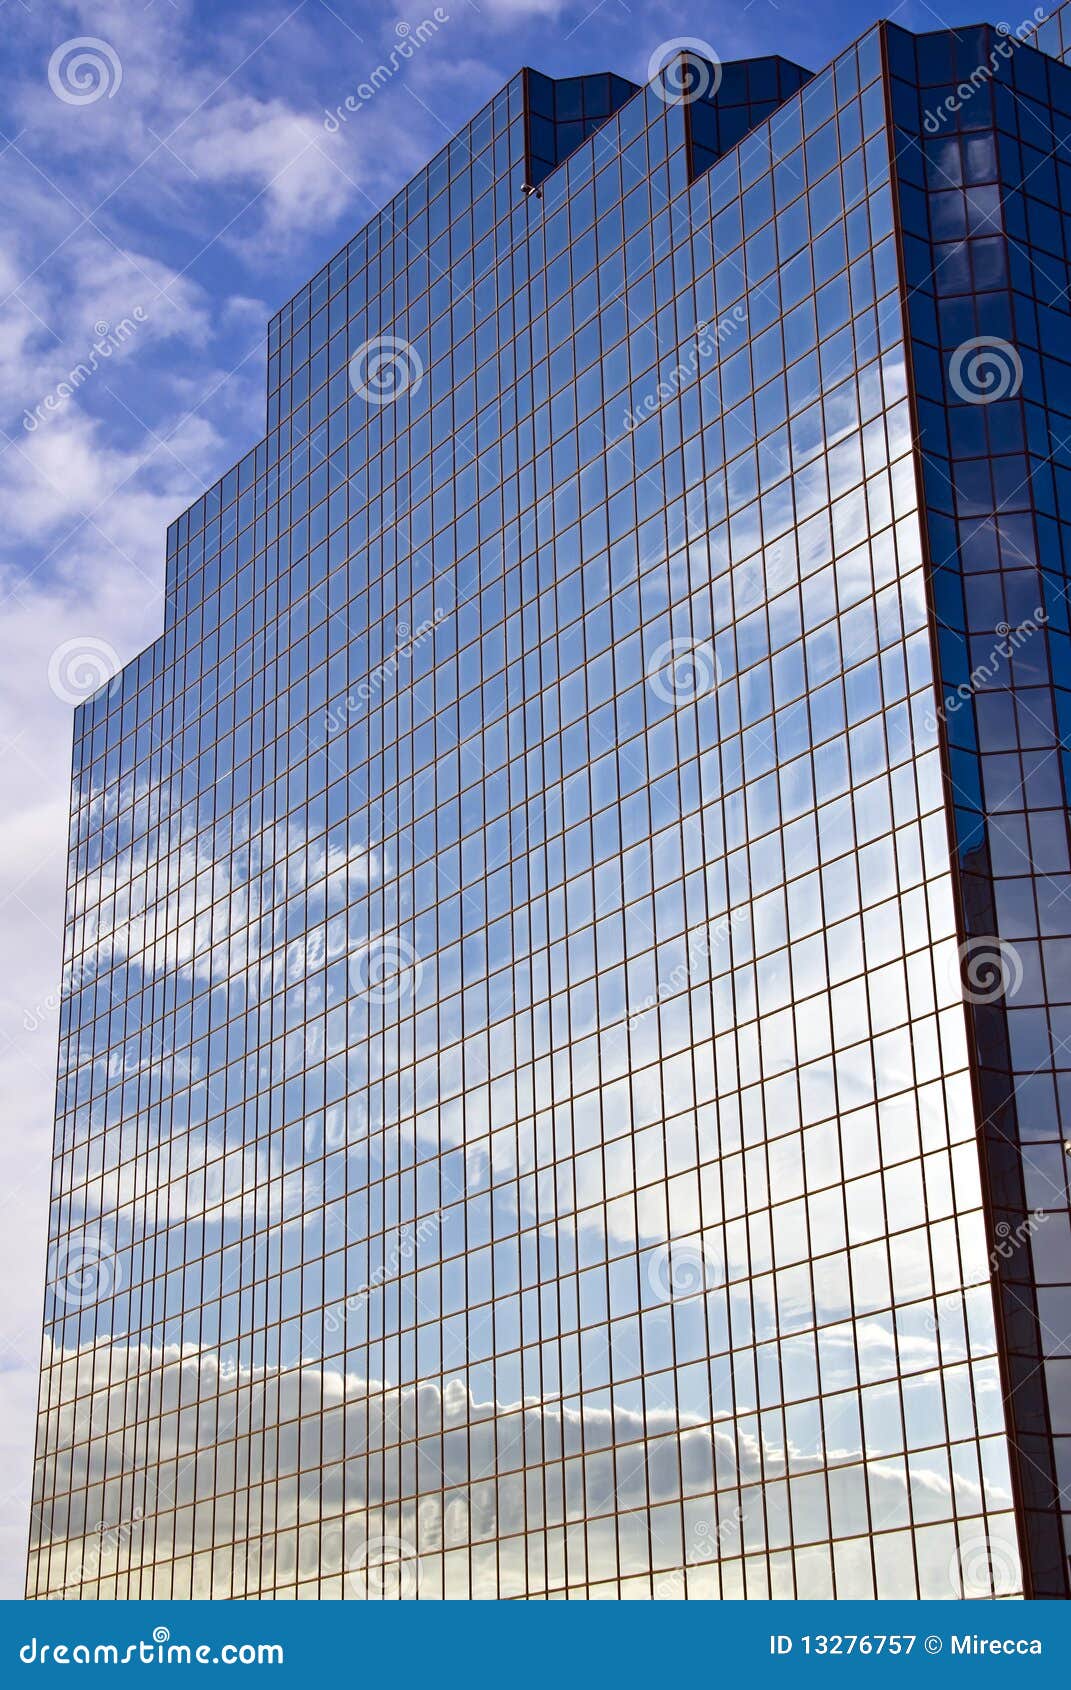 windows and reflections